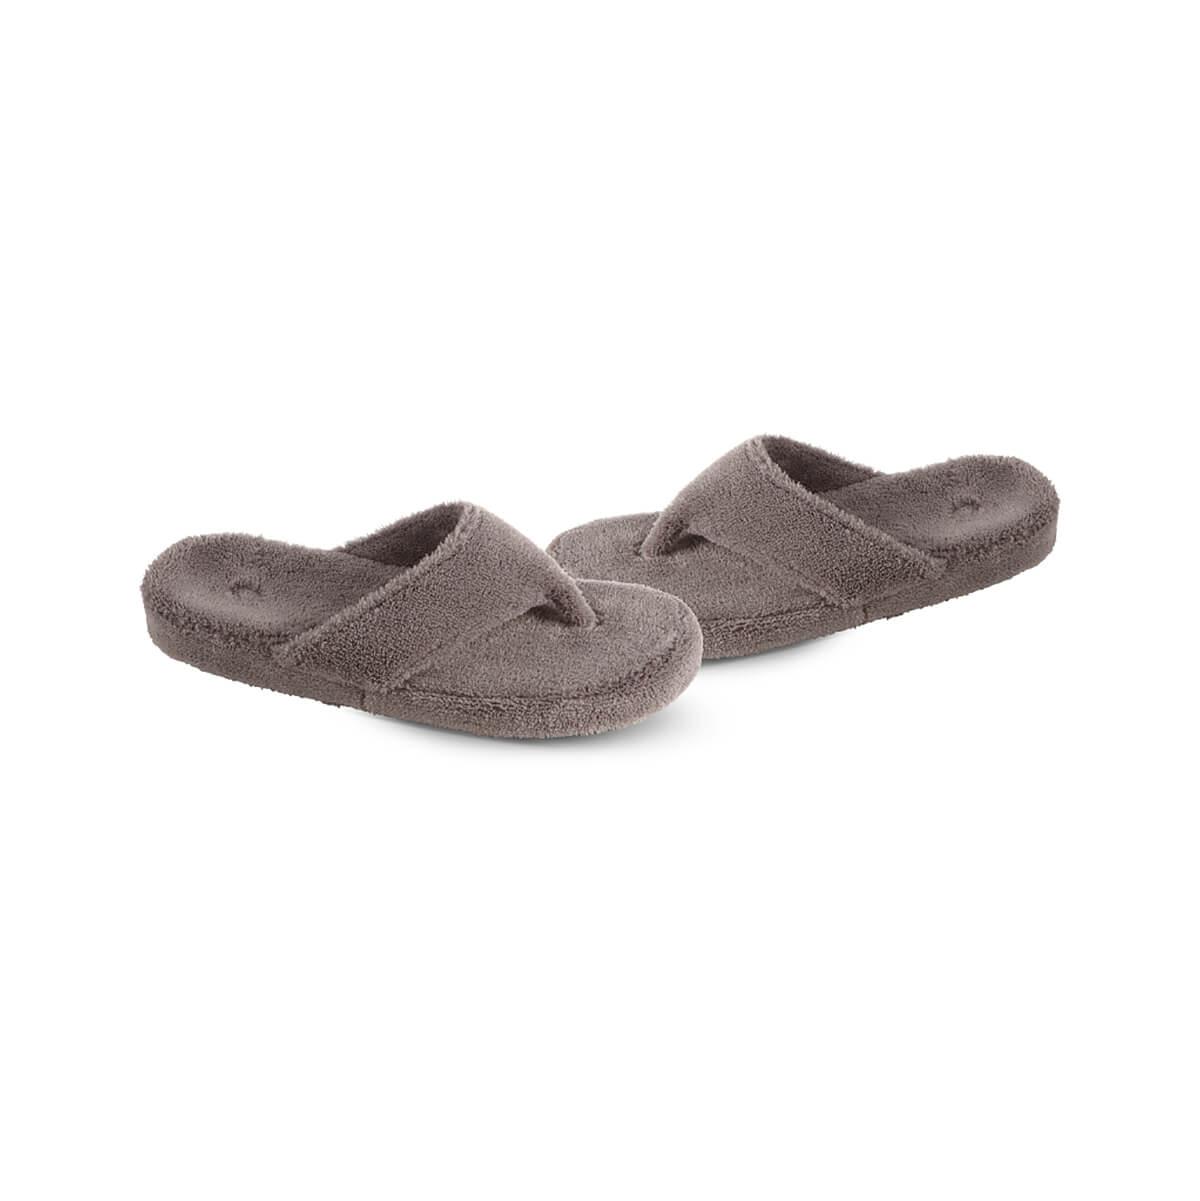  Women's Spa Thong Slippers